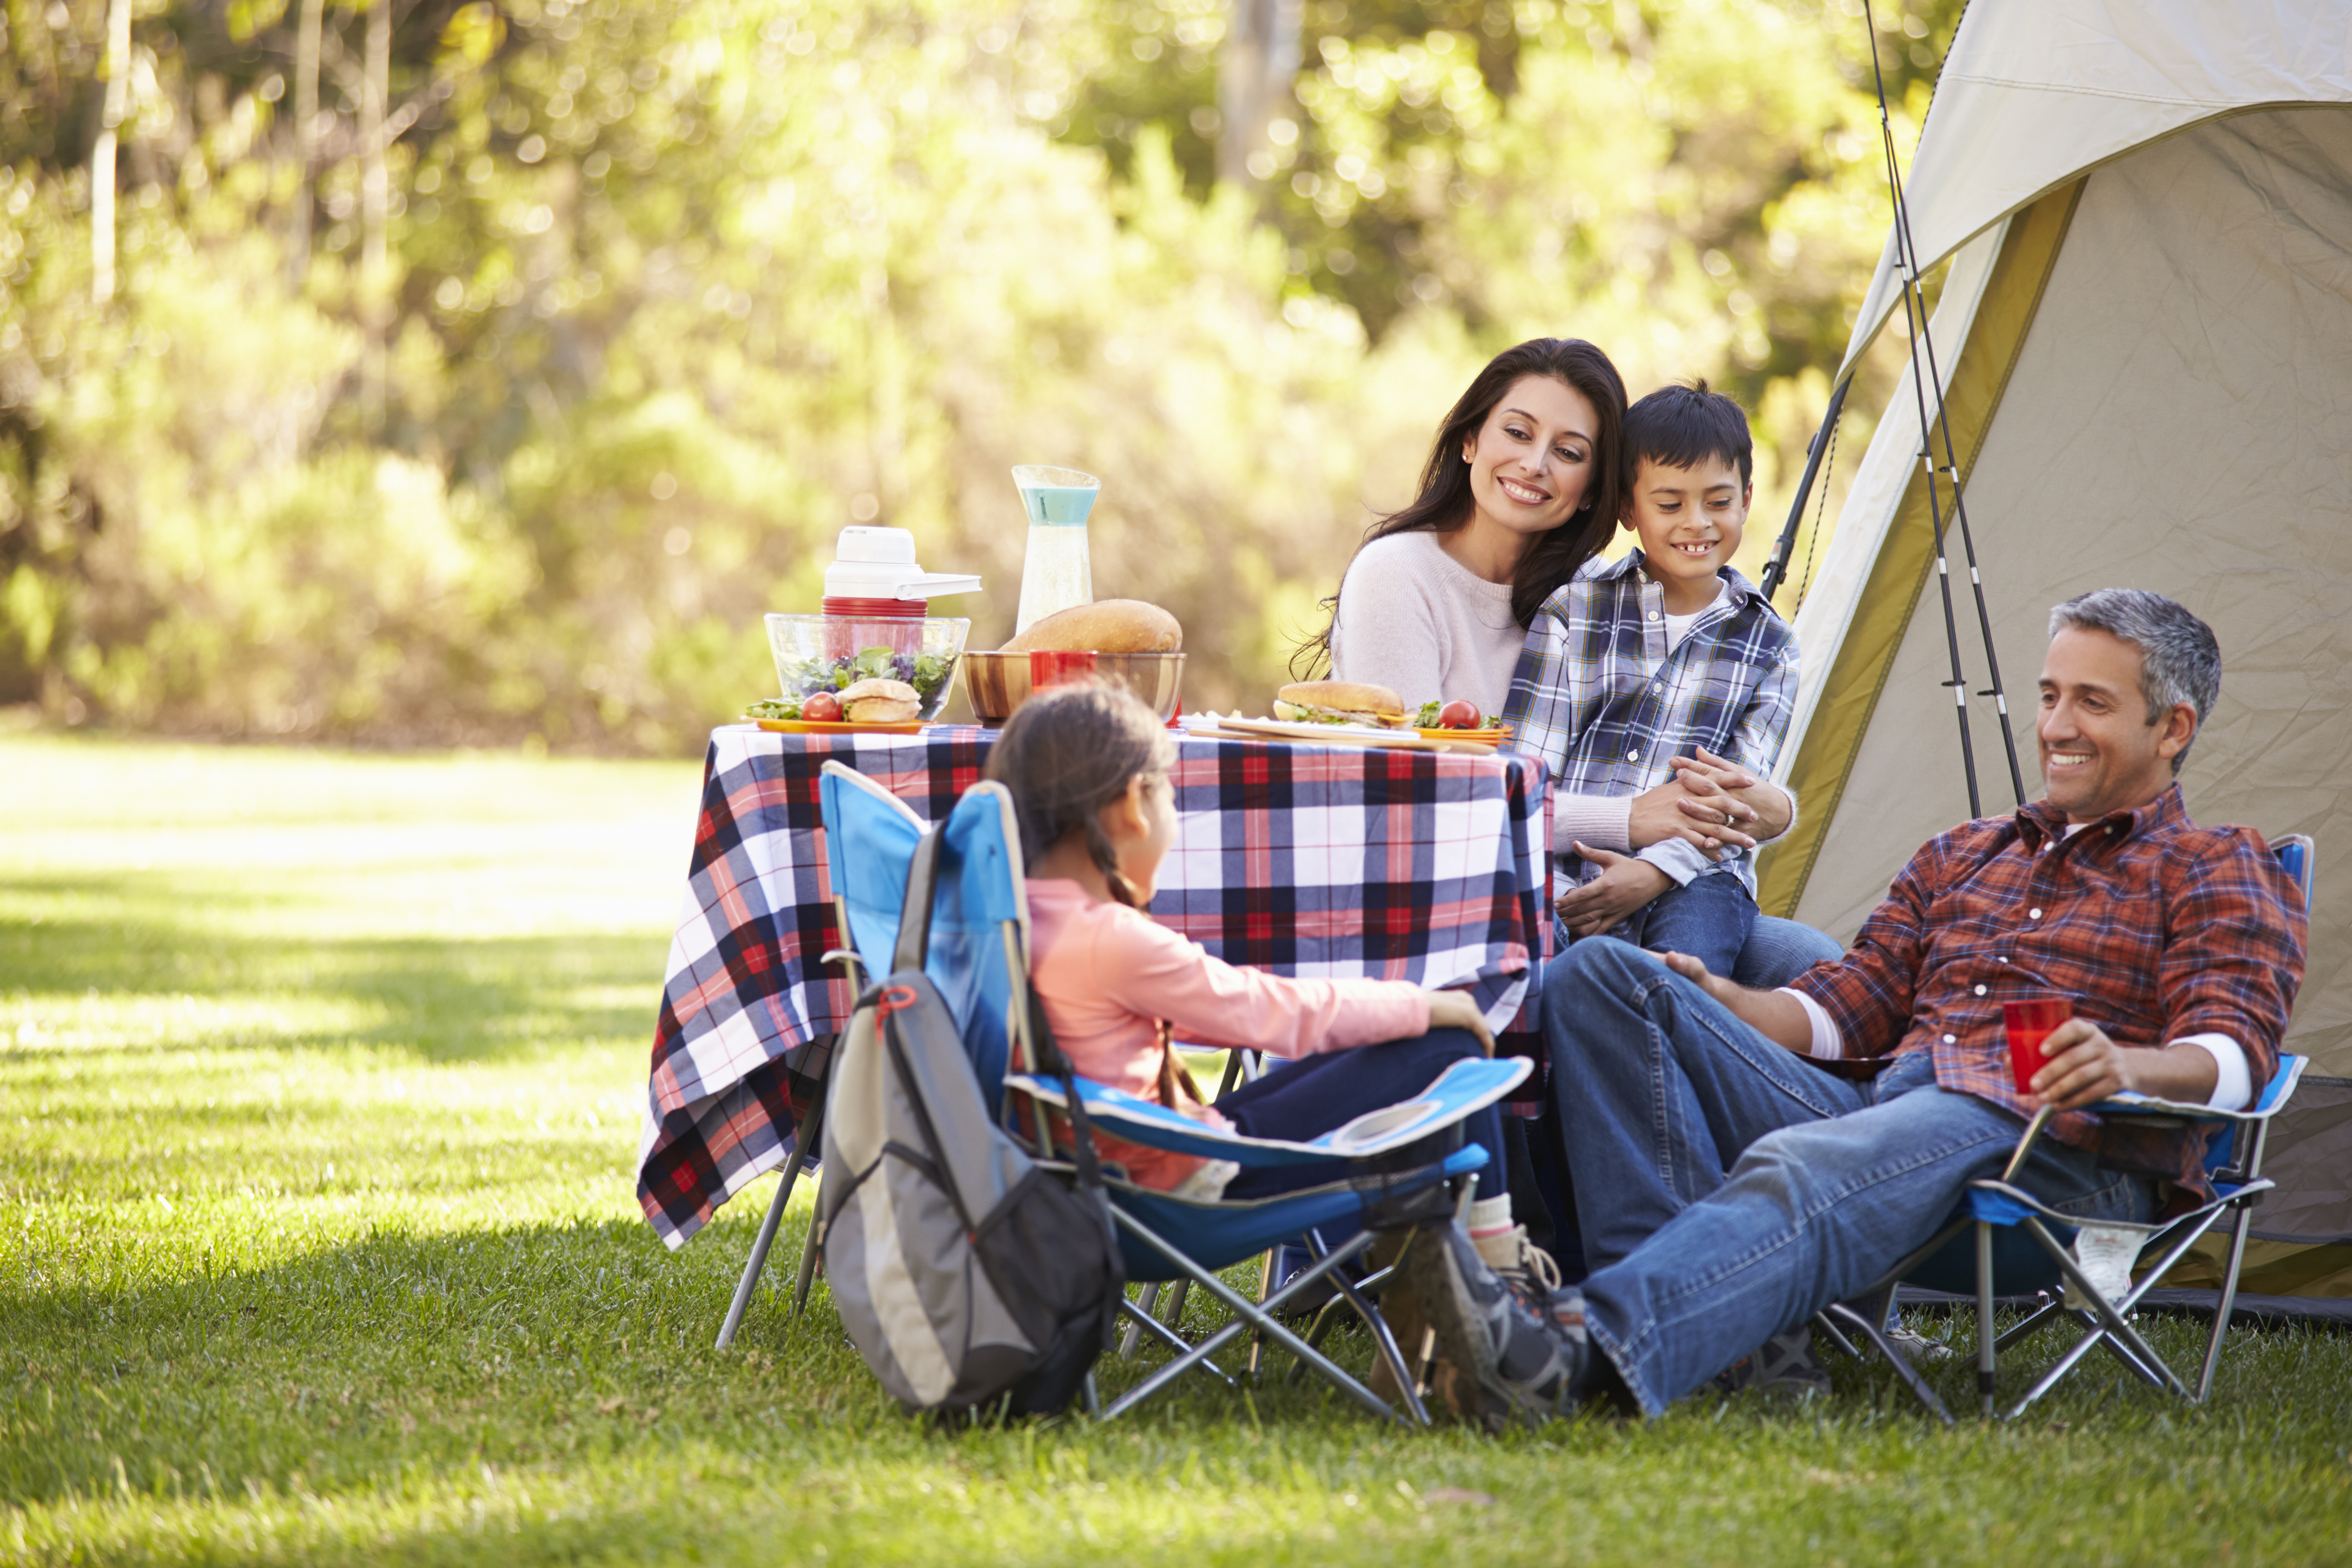 priority health personal wellness camping in michigan family outside tent